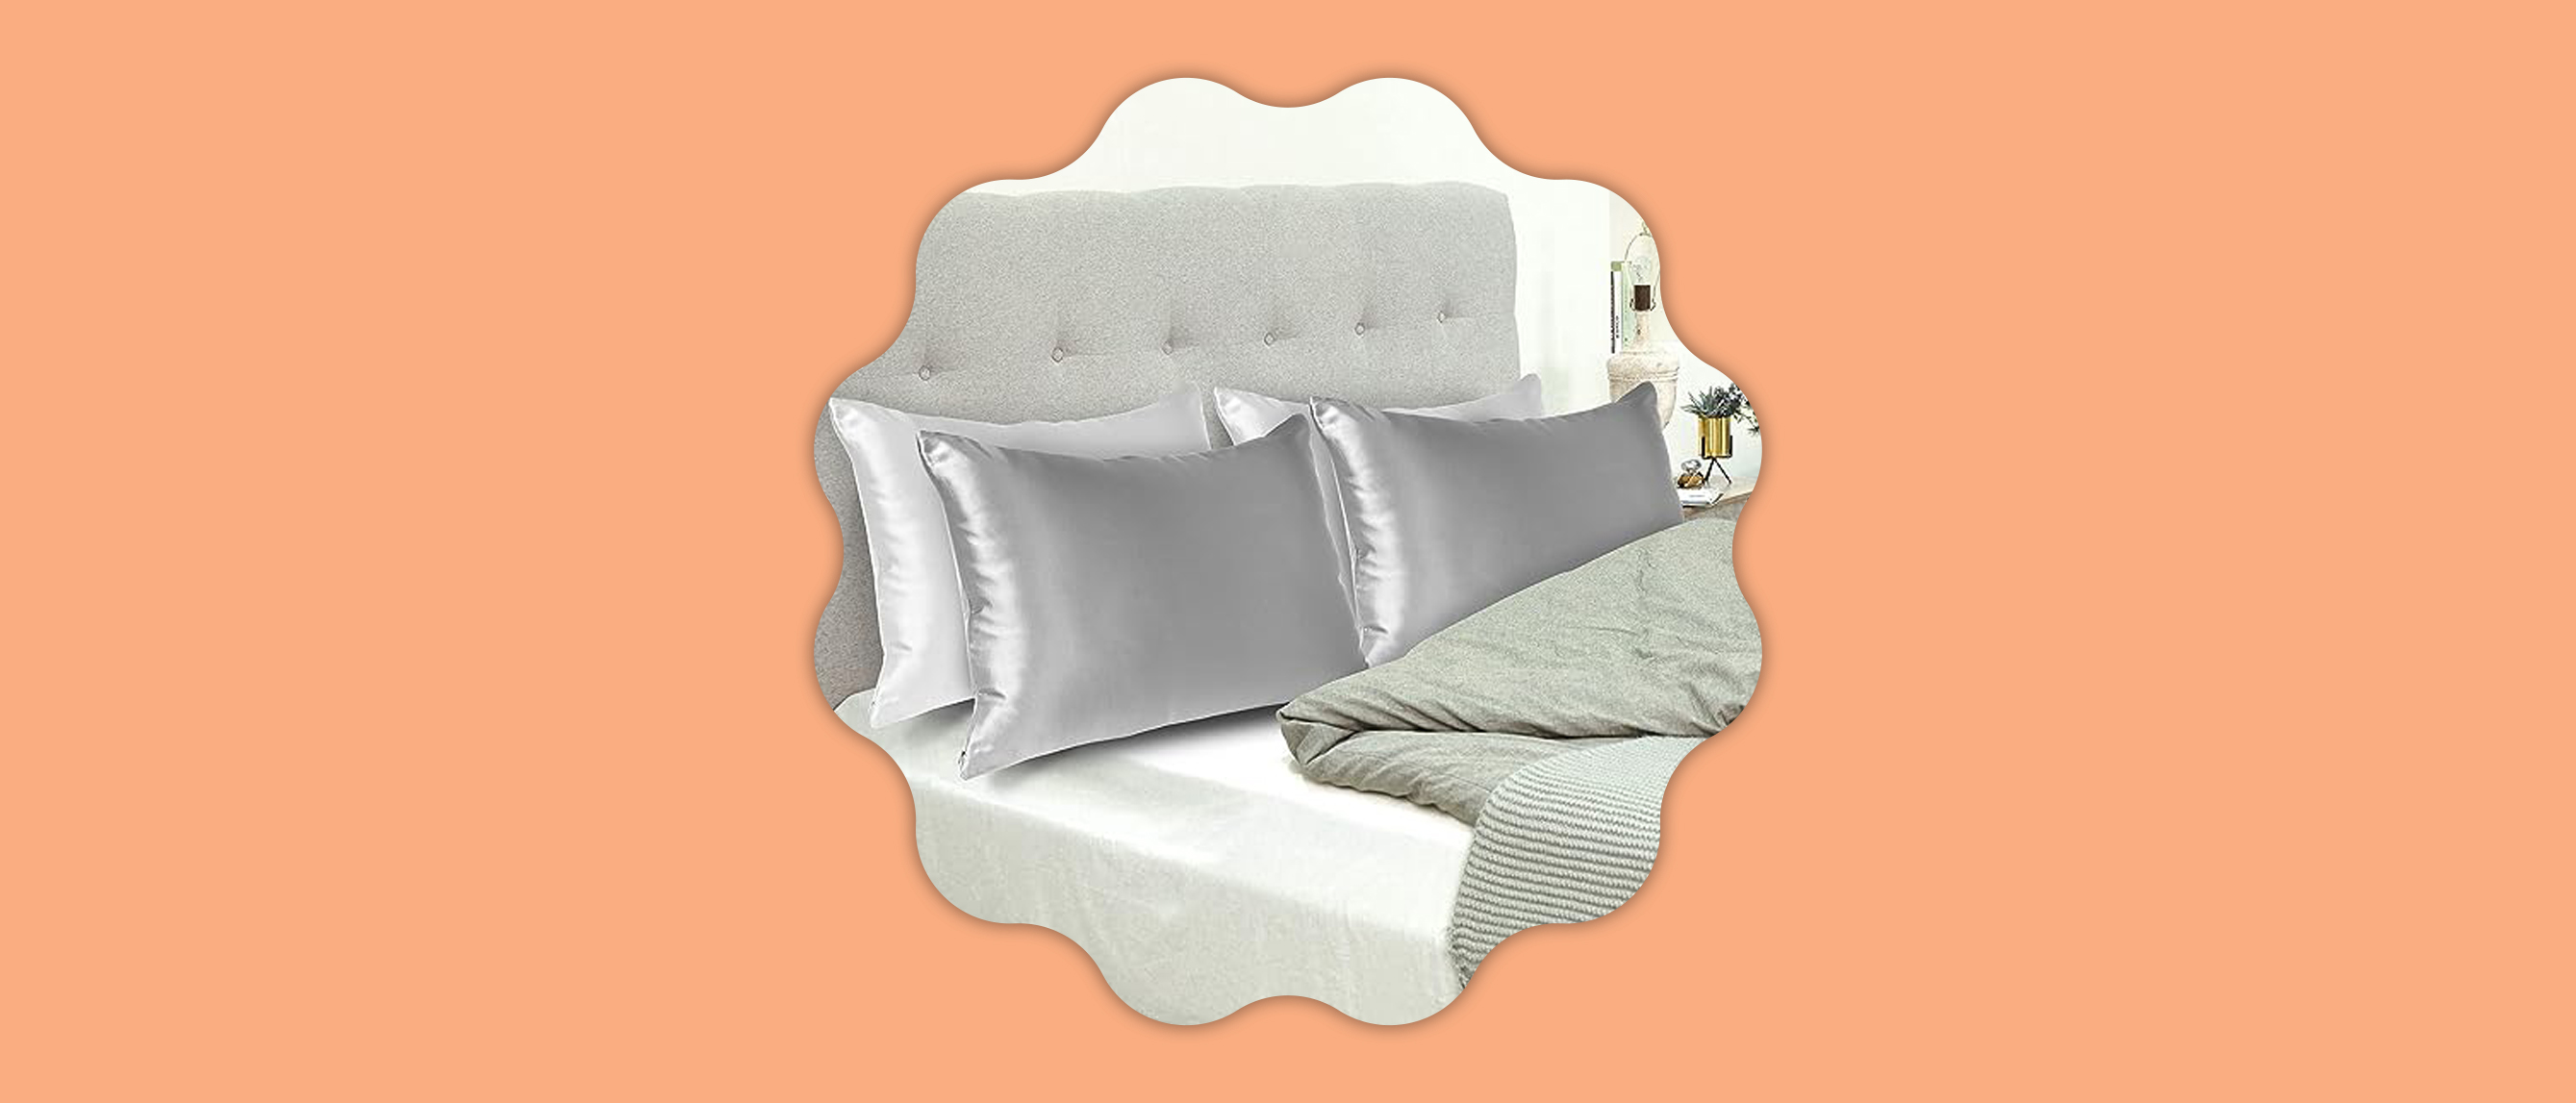 Grey silk pillowcases on a bed against a pastel orange background